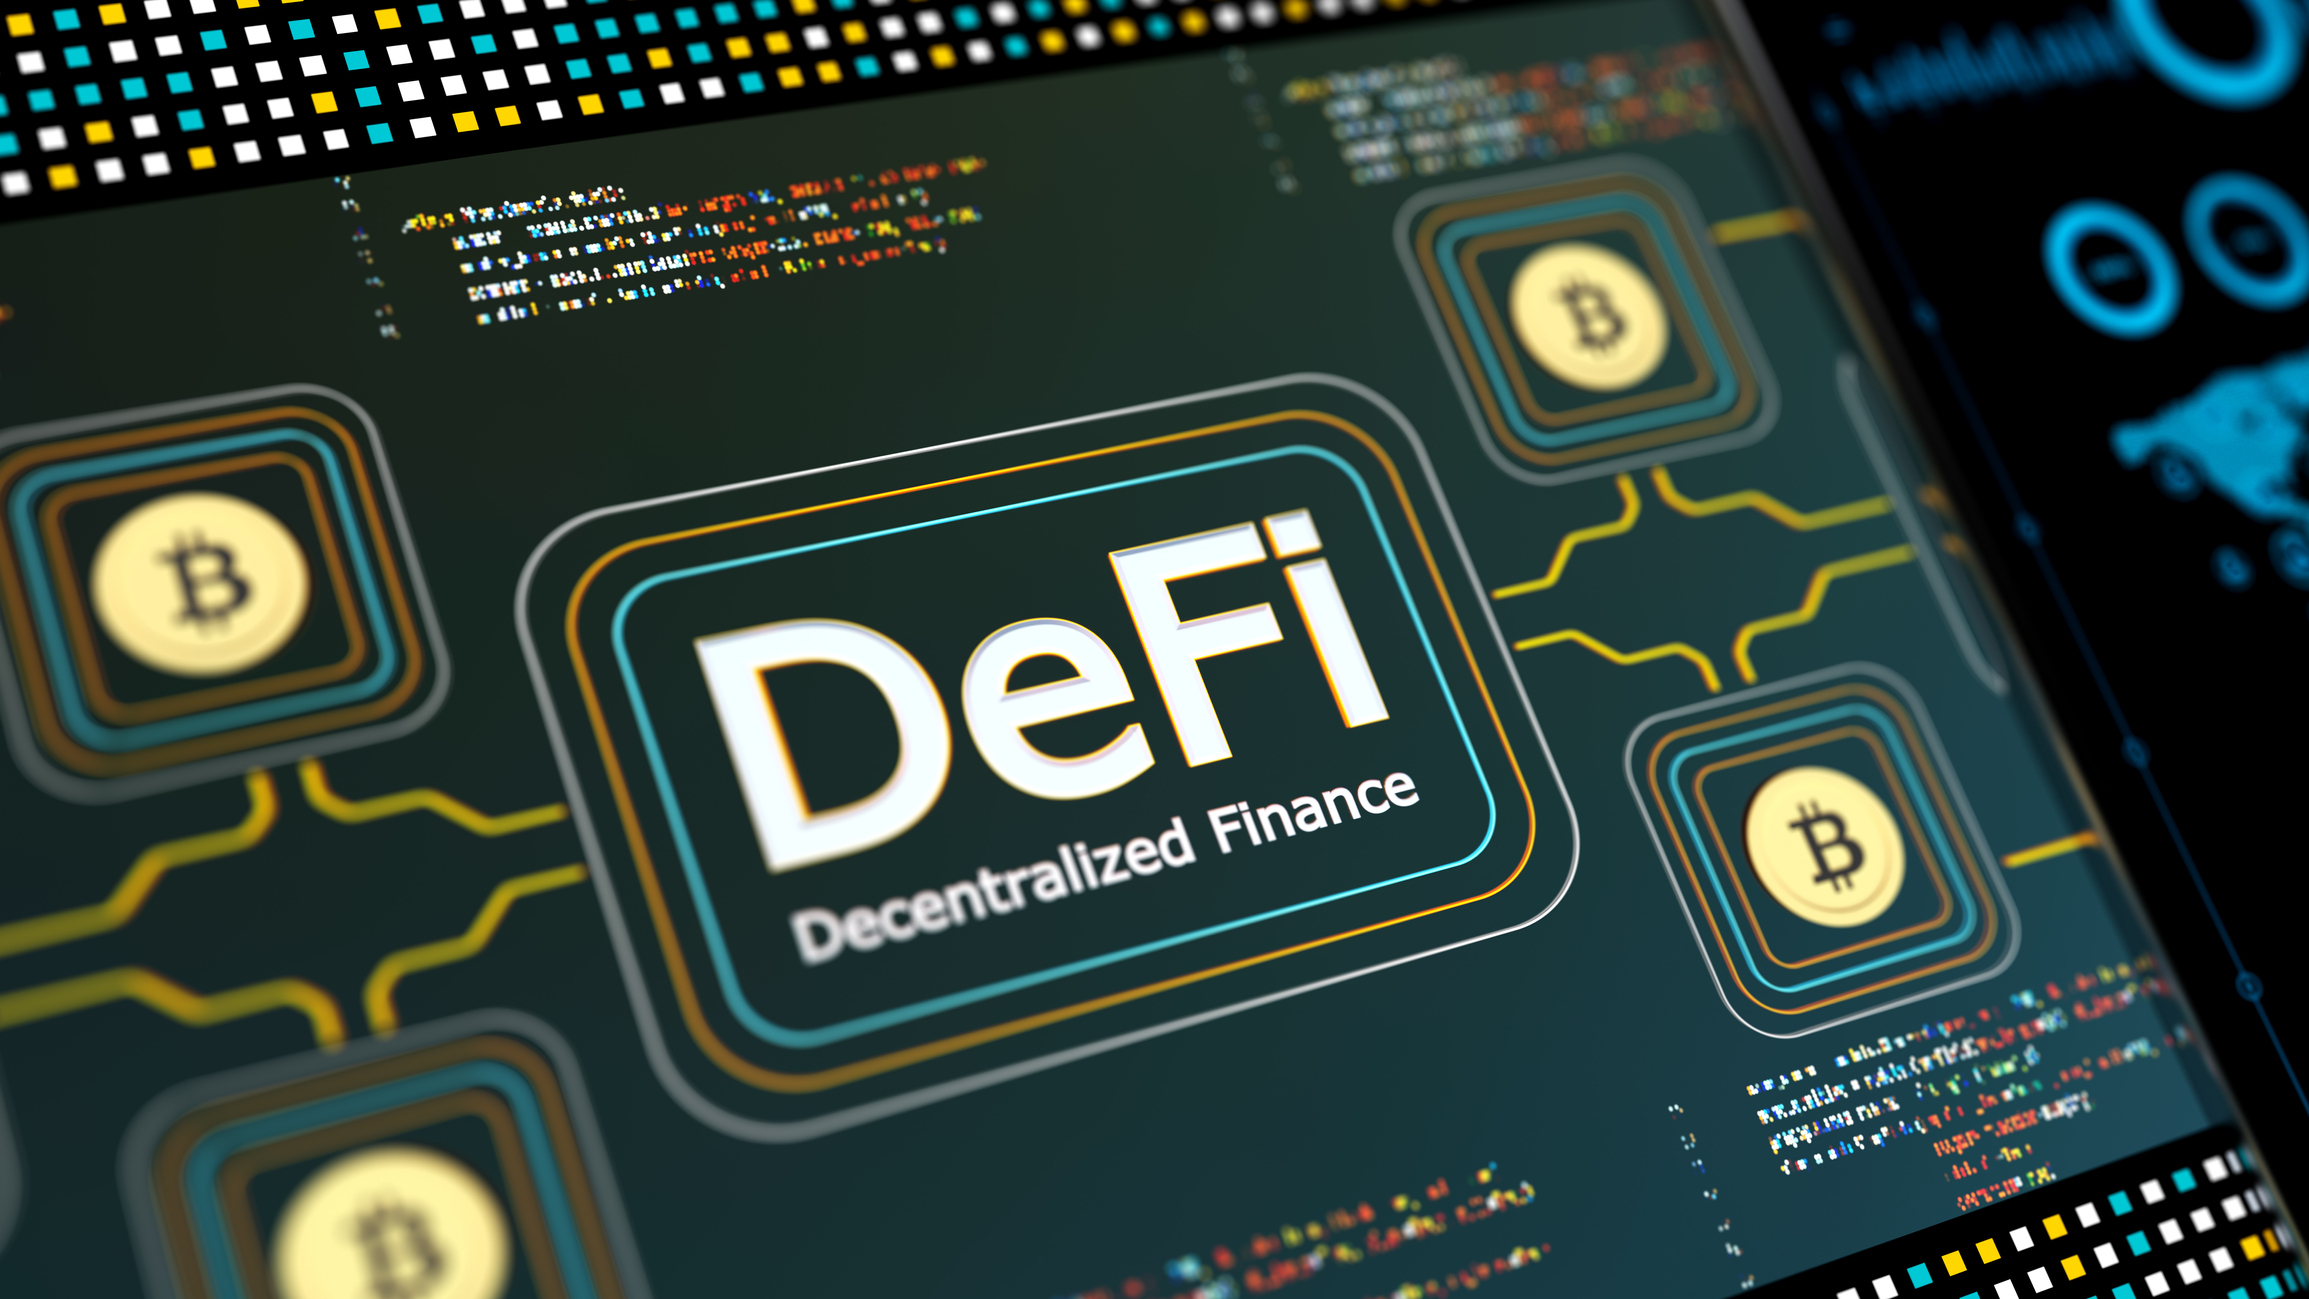 Hashdex announces new DeFi ETF that tracks Aave, Matic and 10 other assets